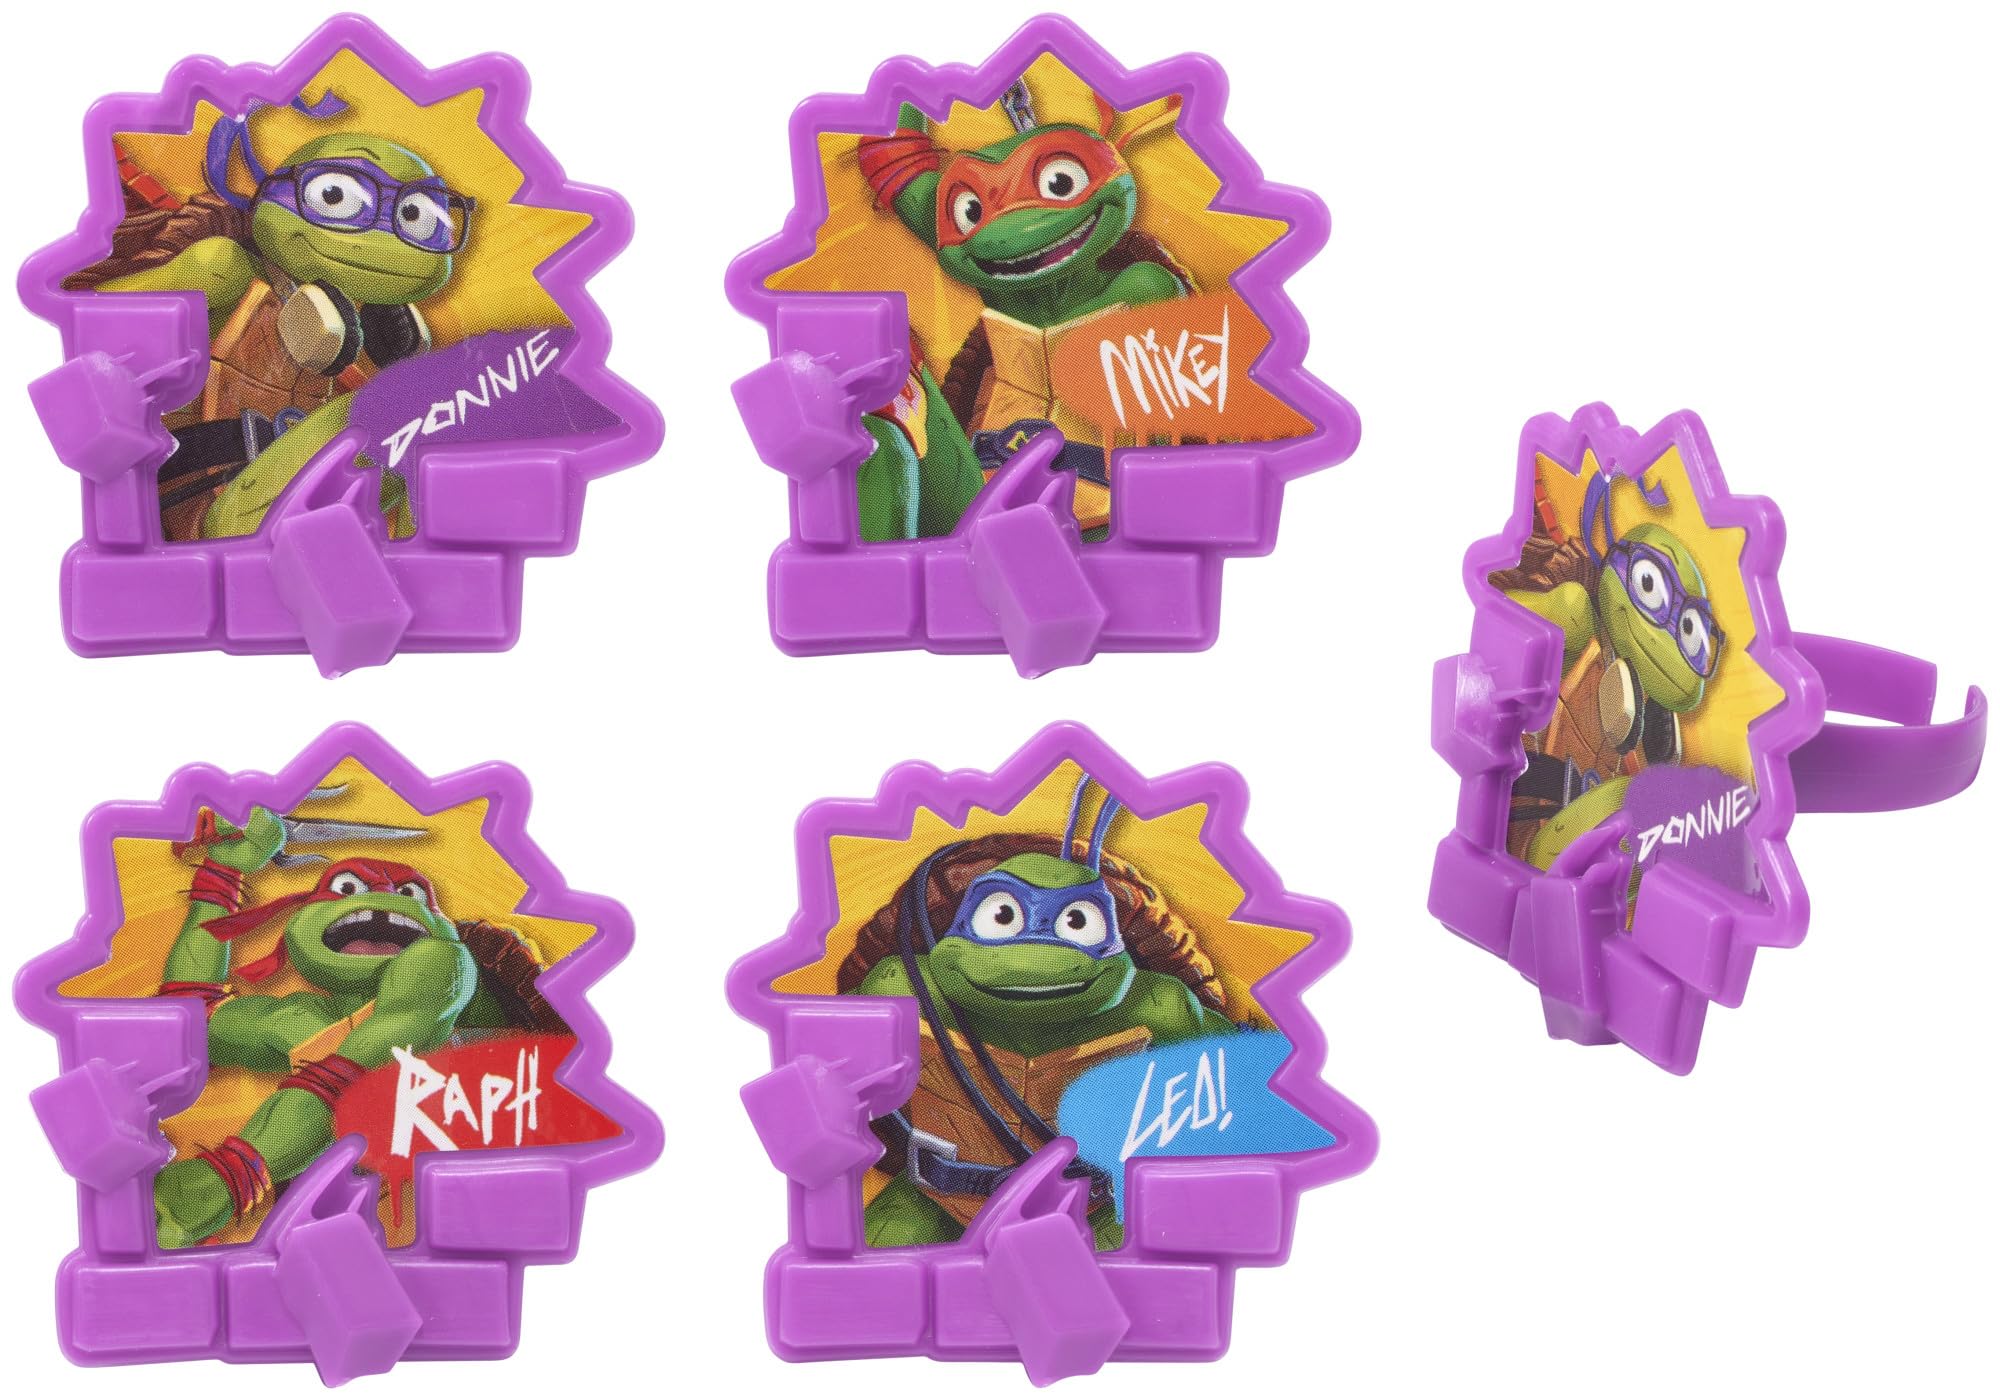 DecoPac Teenage Mutant Ninja Turtles Turtle Power Rings, Cupcake Decorations For Birthday Party, Cakes, And Celebrations - 24 Pack